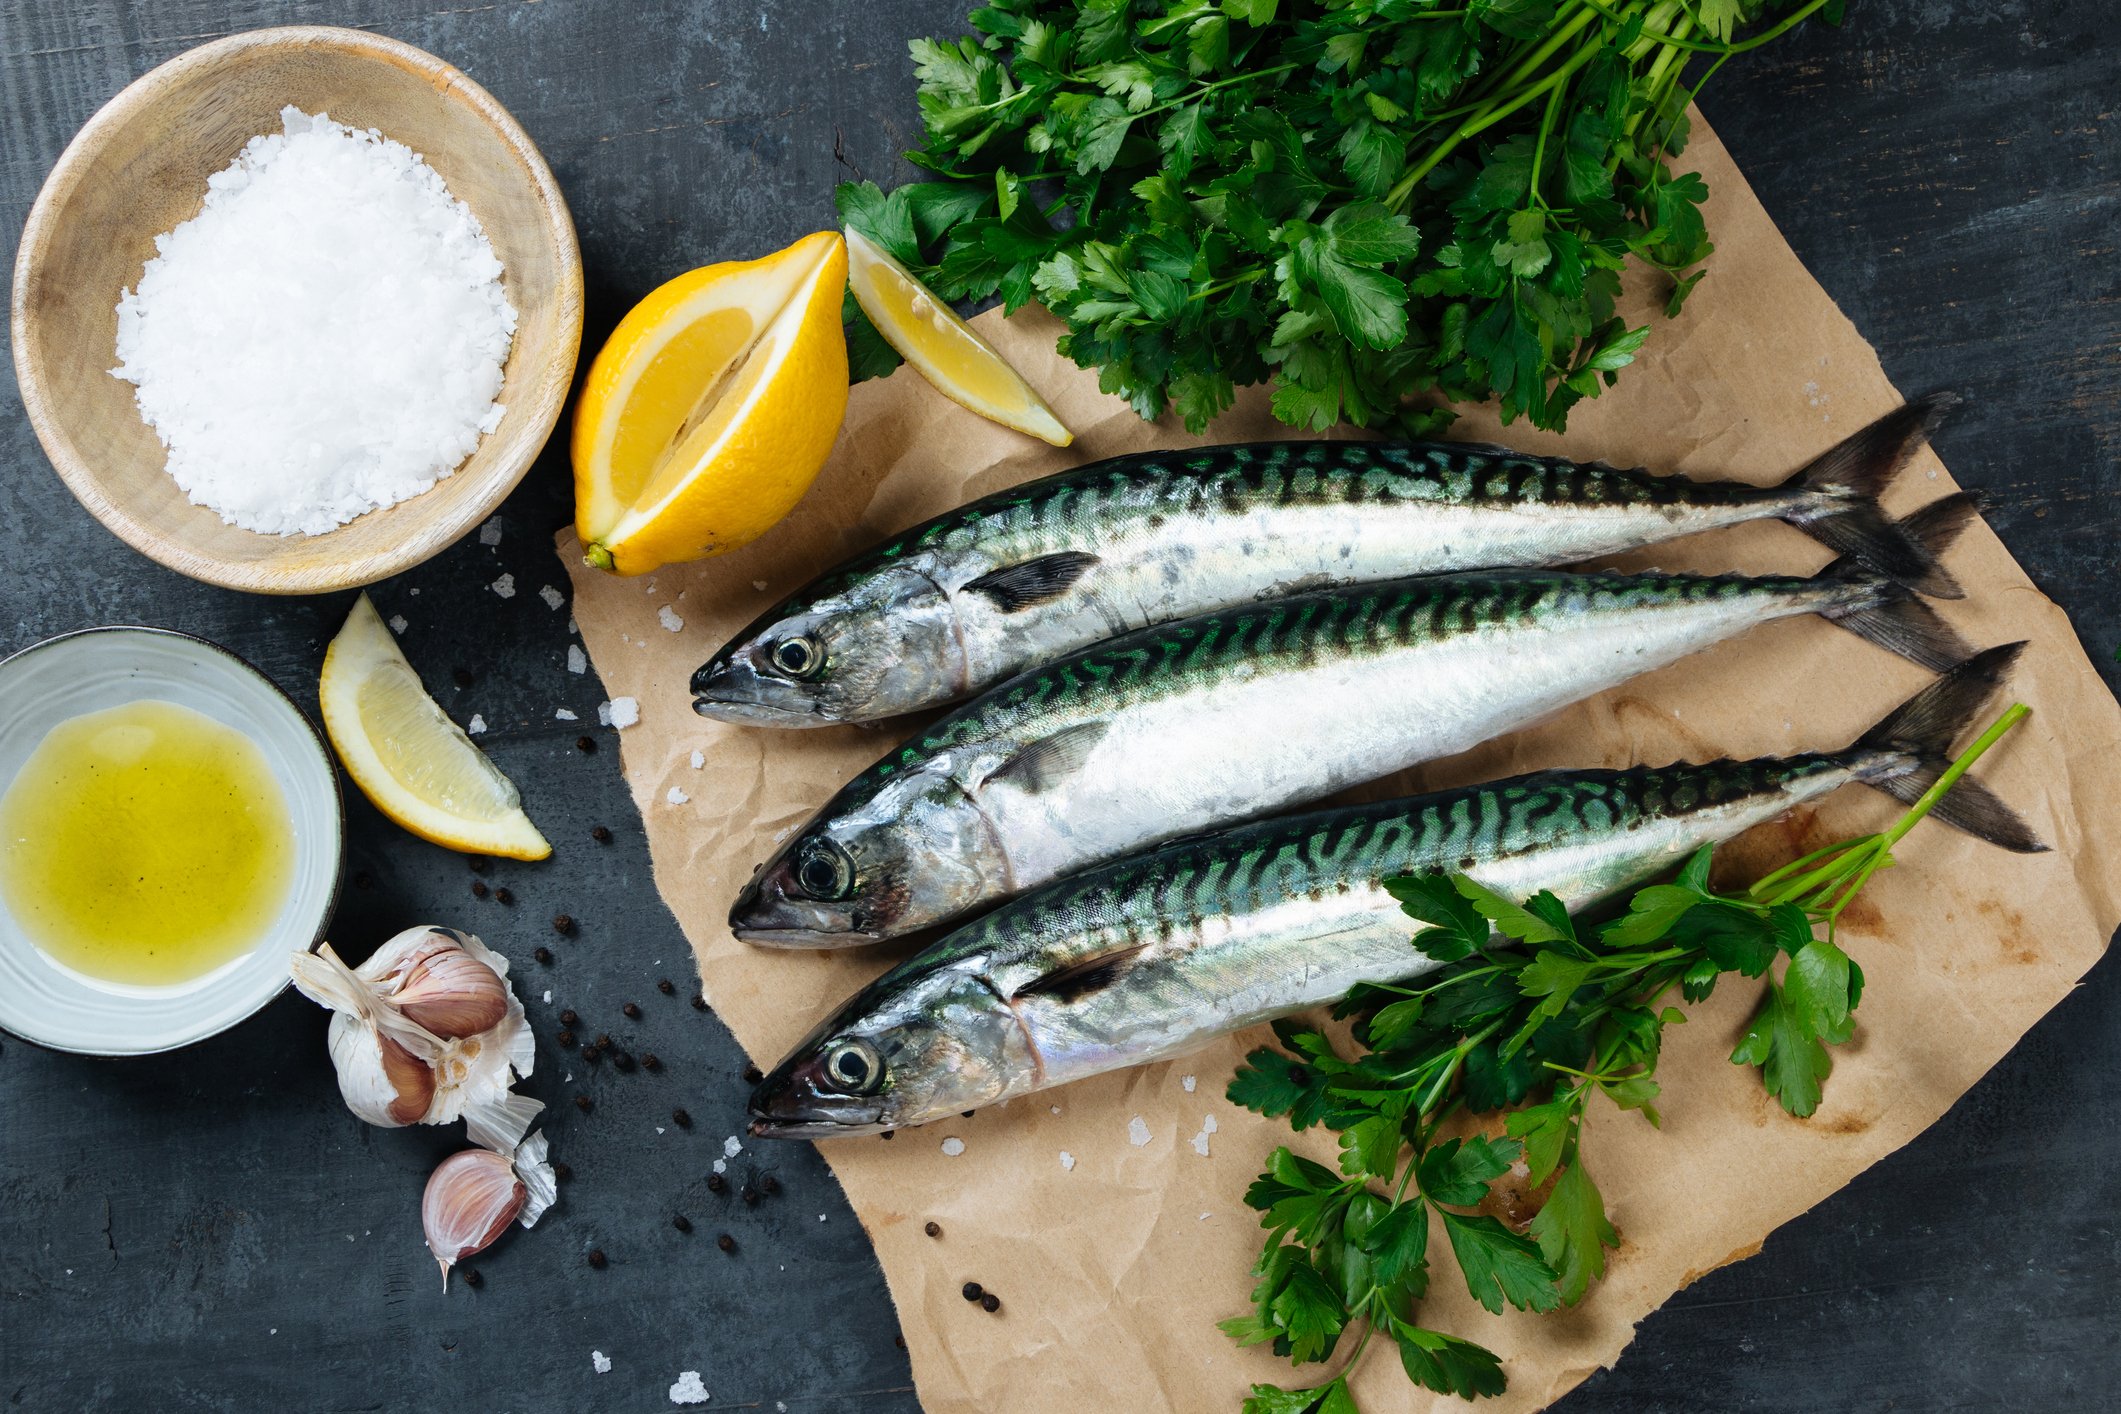 Omega 3 fish is a good fertility food for women